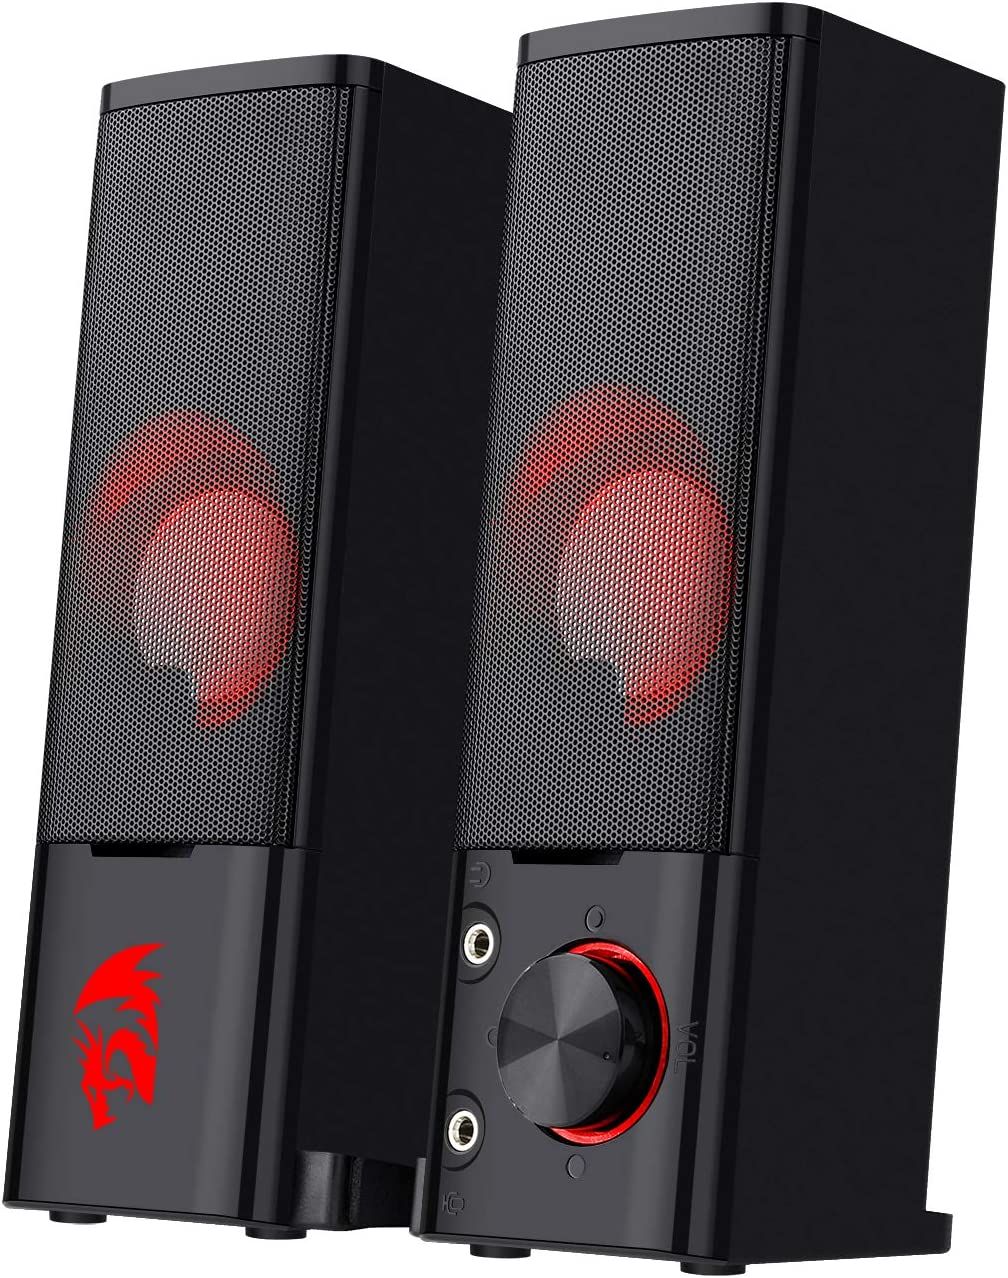 redragon gs550 orpheus speakers viewed at an angle